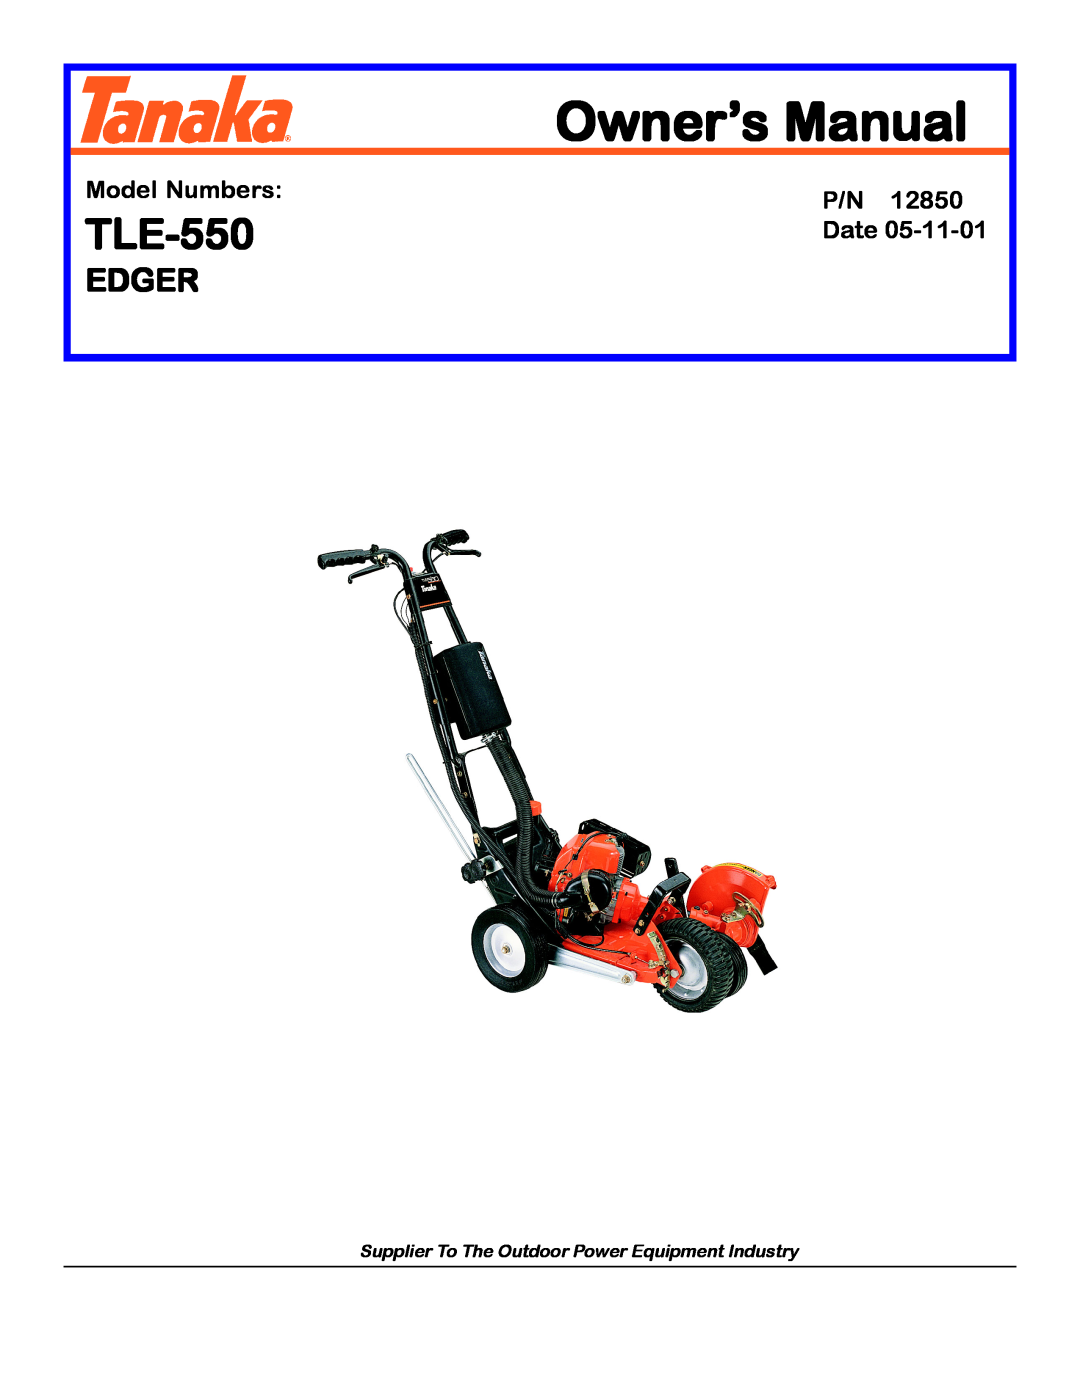 Tanaka TLE-550 manual Edger, Model Numbers, Date, Supplier To The Outdoor Power Equipment Industry 